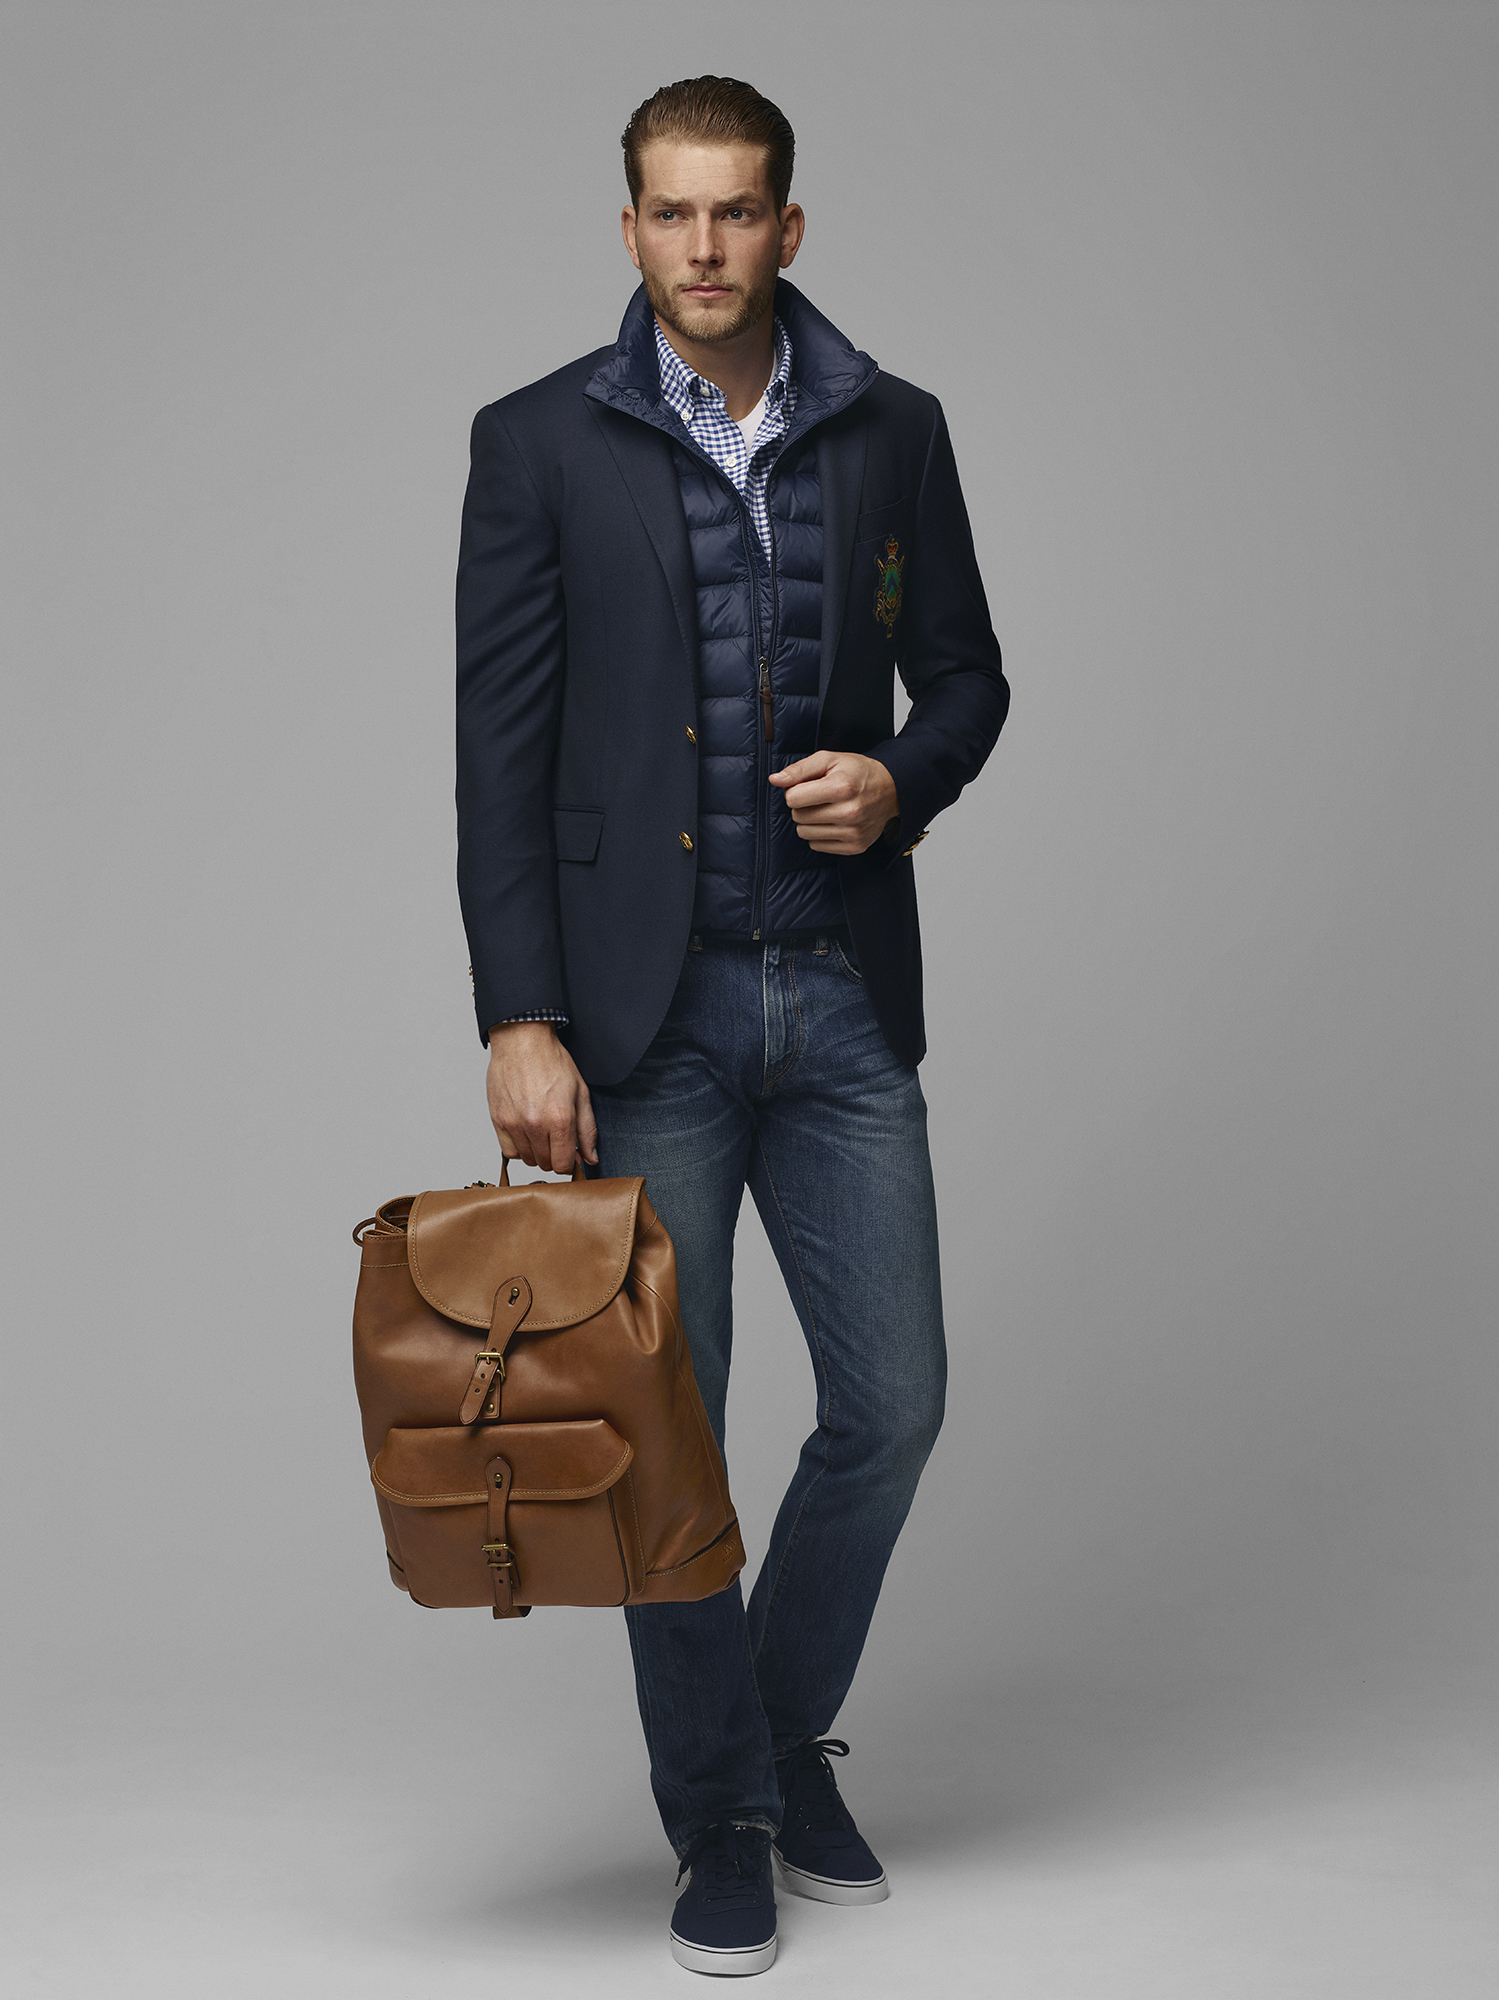 Five ways to wear the crested blazer with Polo Ralph Lauren - Brummell